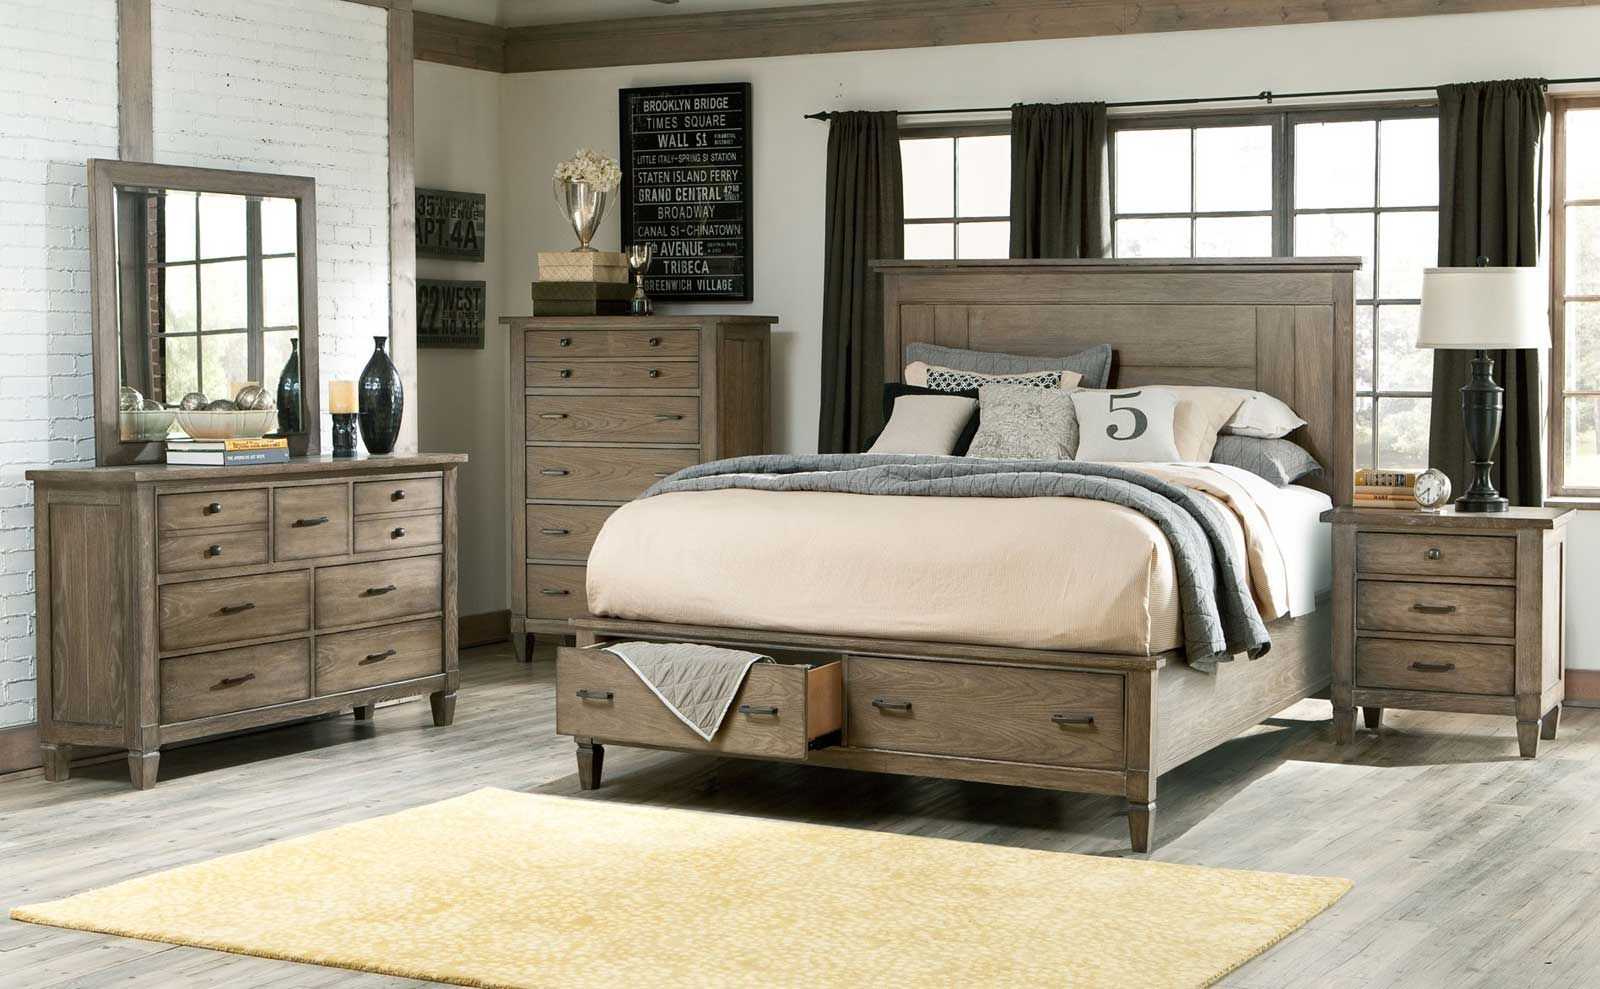 Modern Rustic Bedroom Furniture Sets Master Bed Room Rustic with regard to sizing 1600 X 989